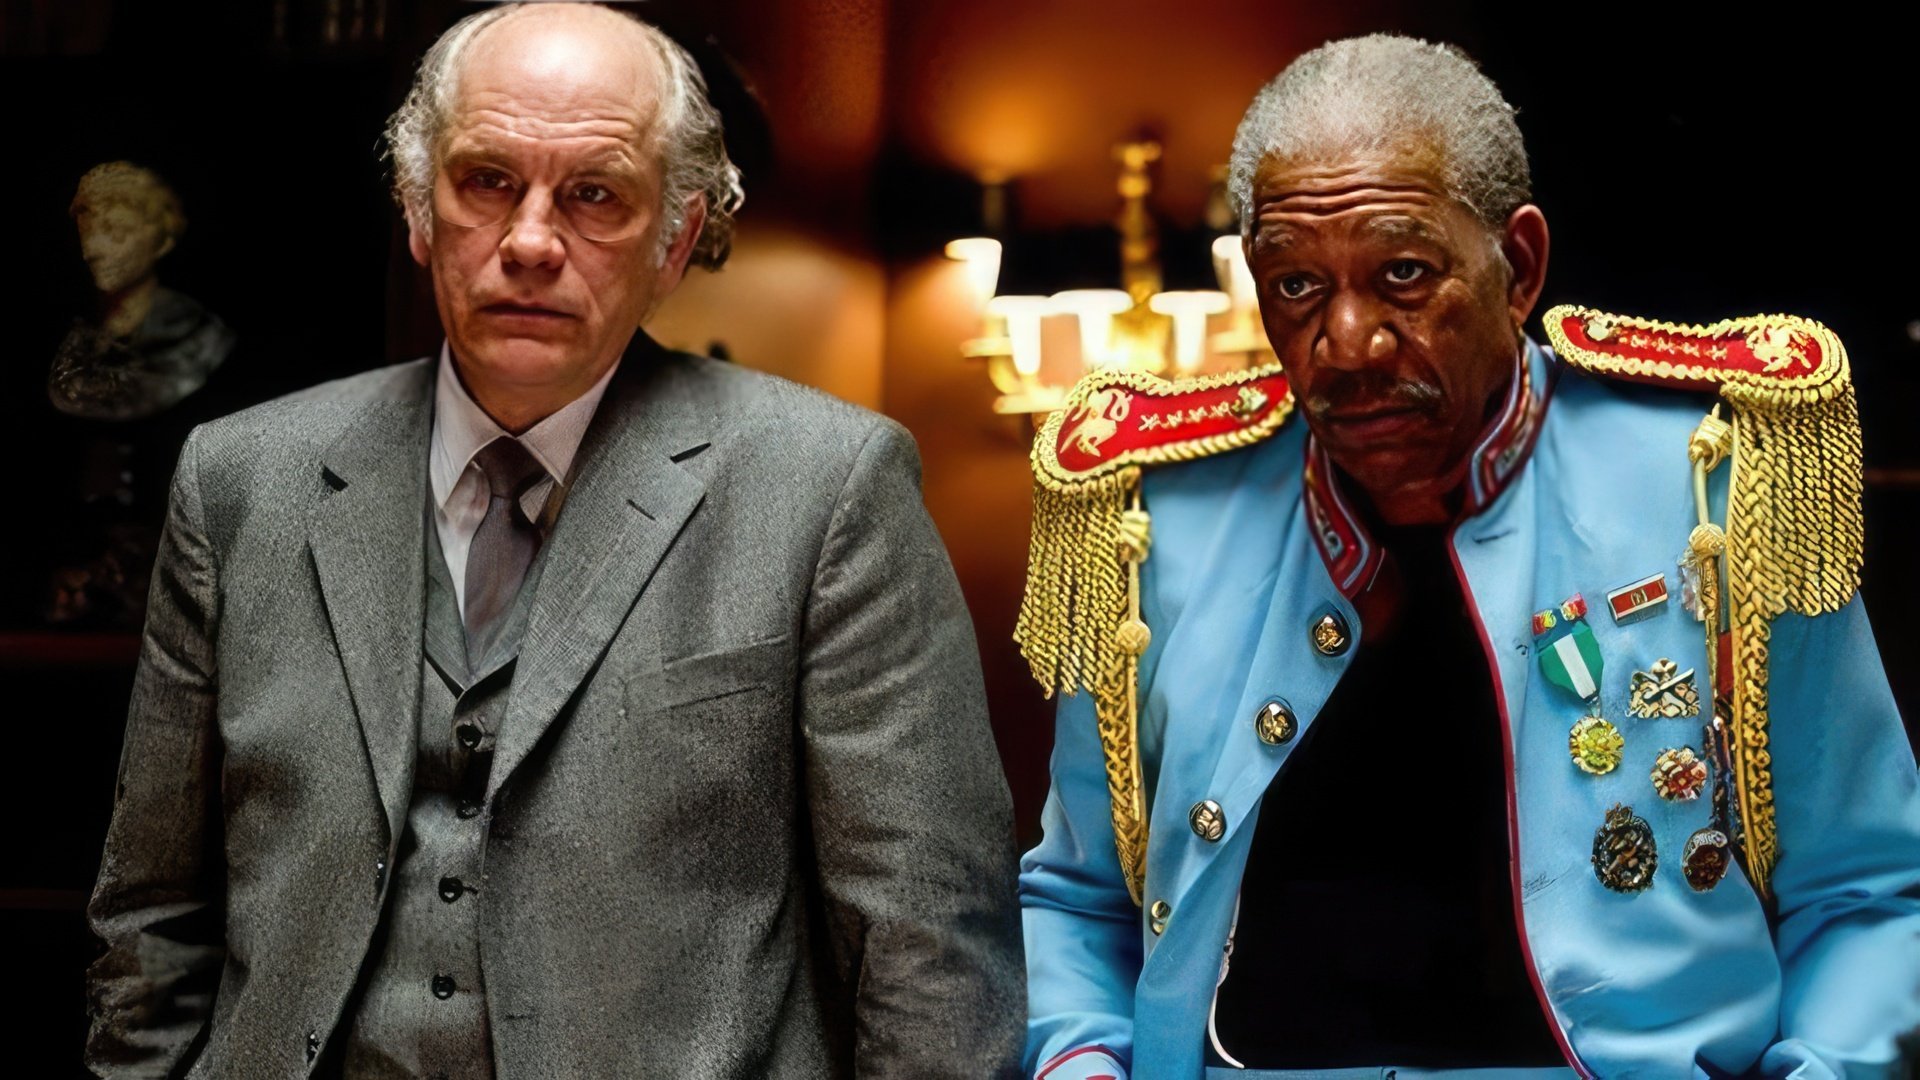 Morgan Freeman and John Malkovich in the RED